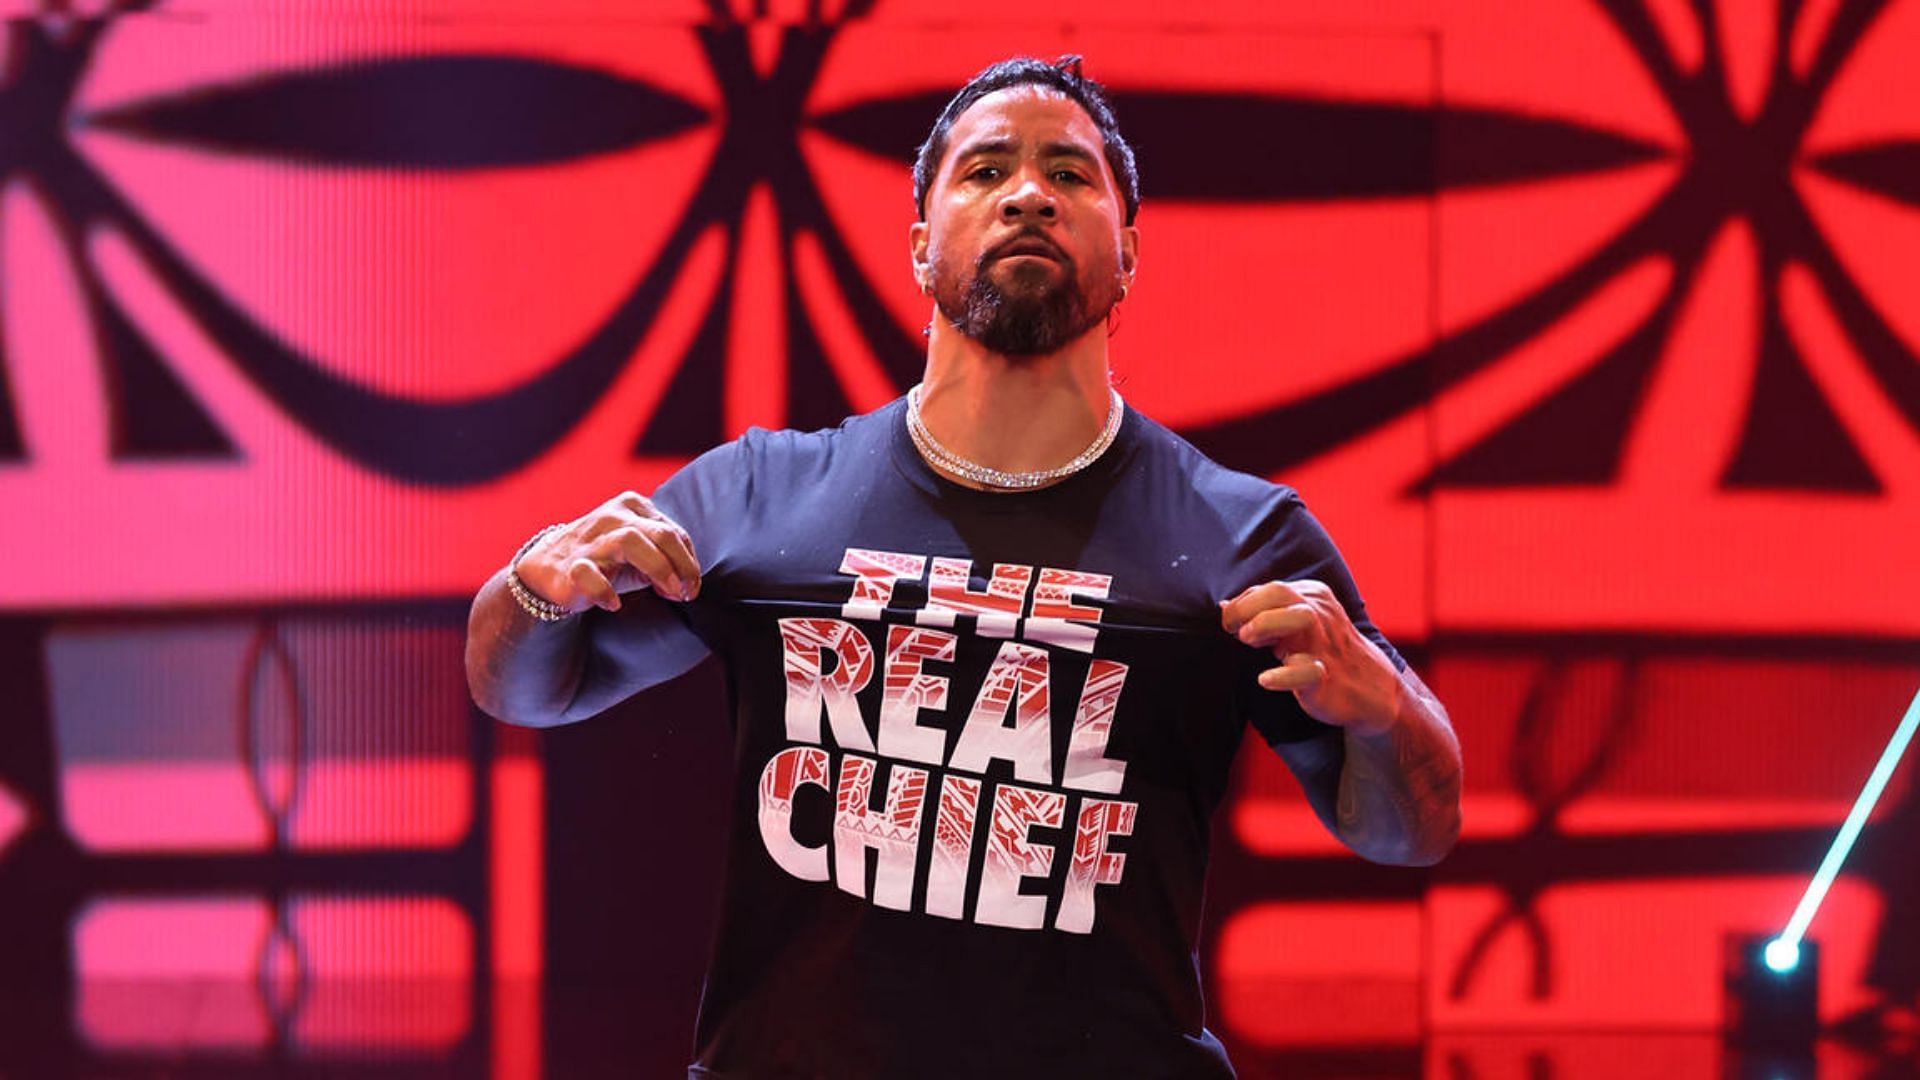 4 replacement opponents for Roman Reigns if Jey Uso doesn't make it to WWE  SummerSlam - Injured star to return and step up to The Tribal Chief?